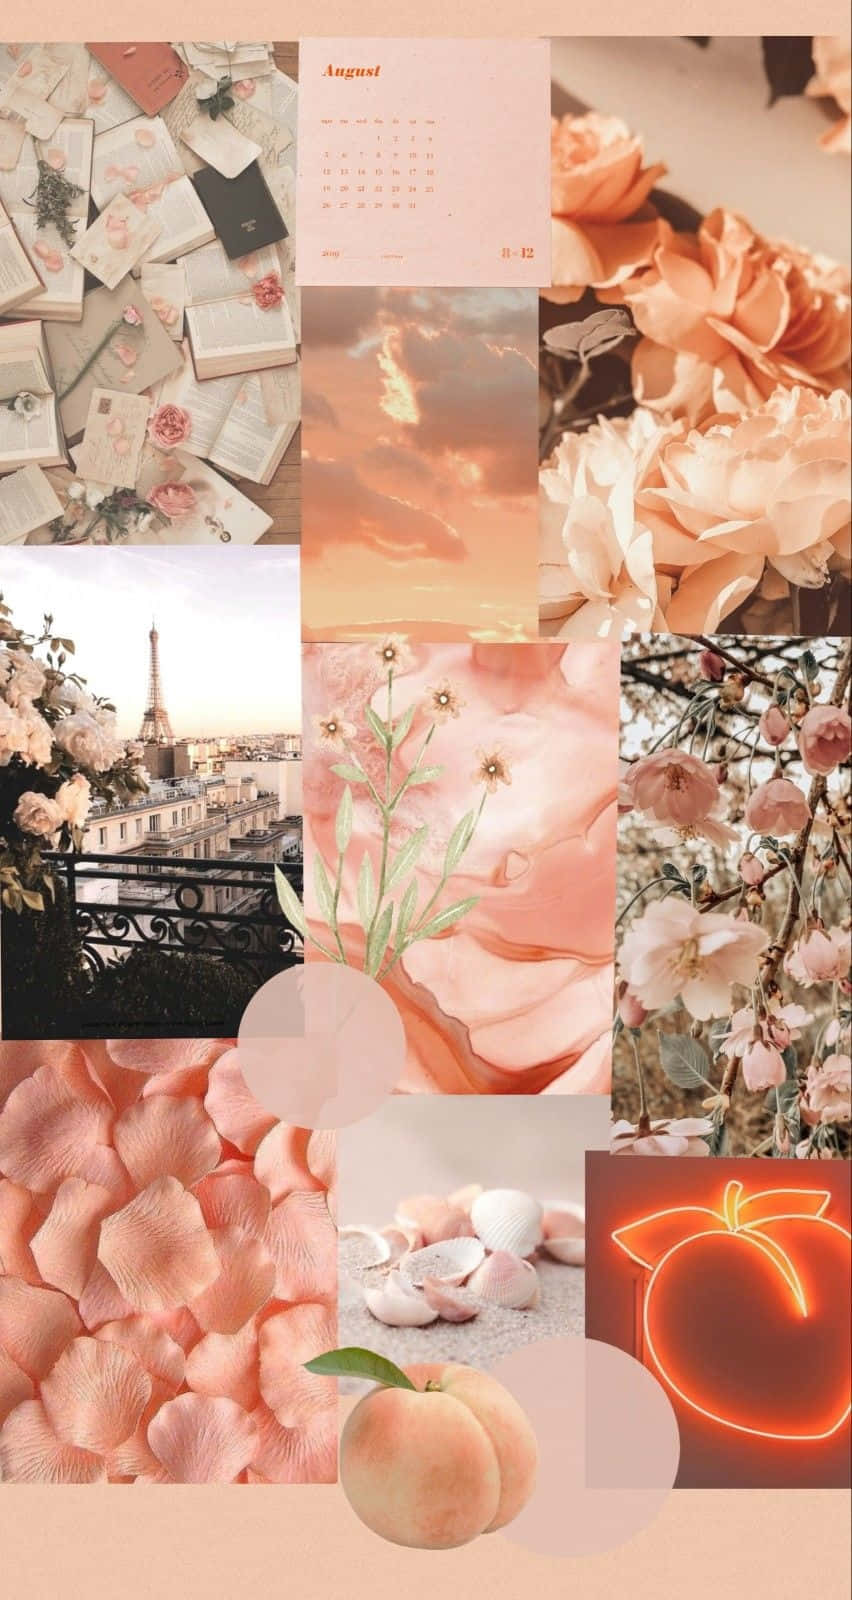 Vintage Peach Aesthetic Collage Wallpaper